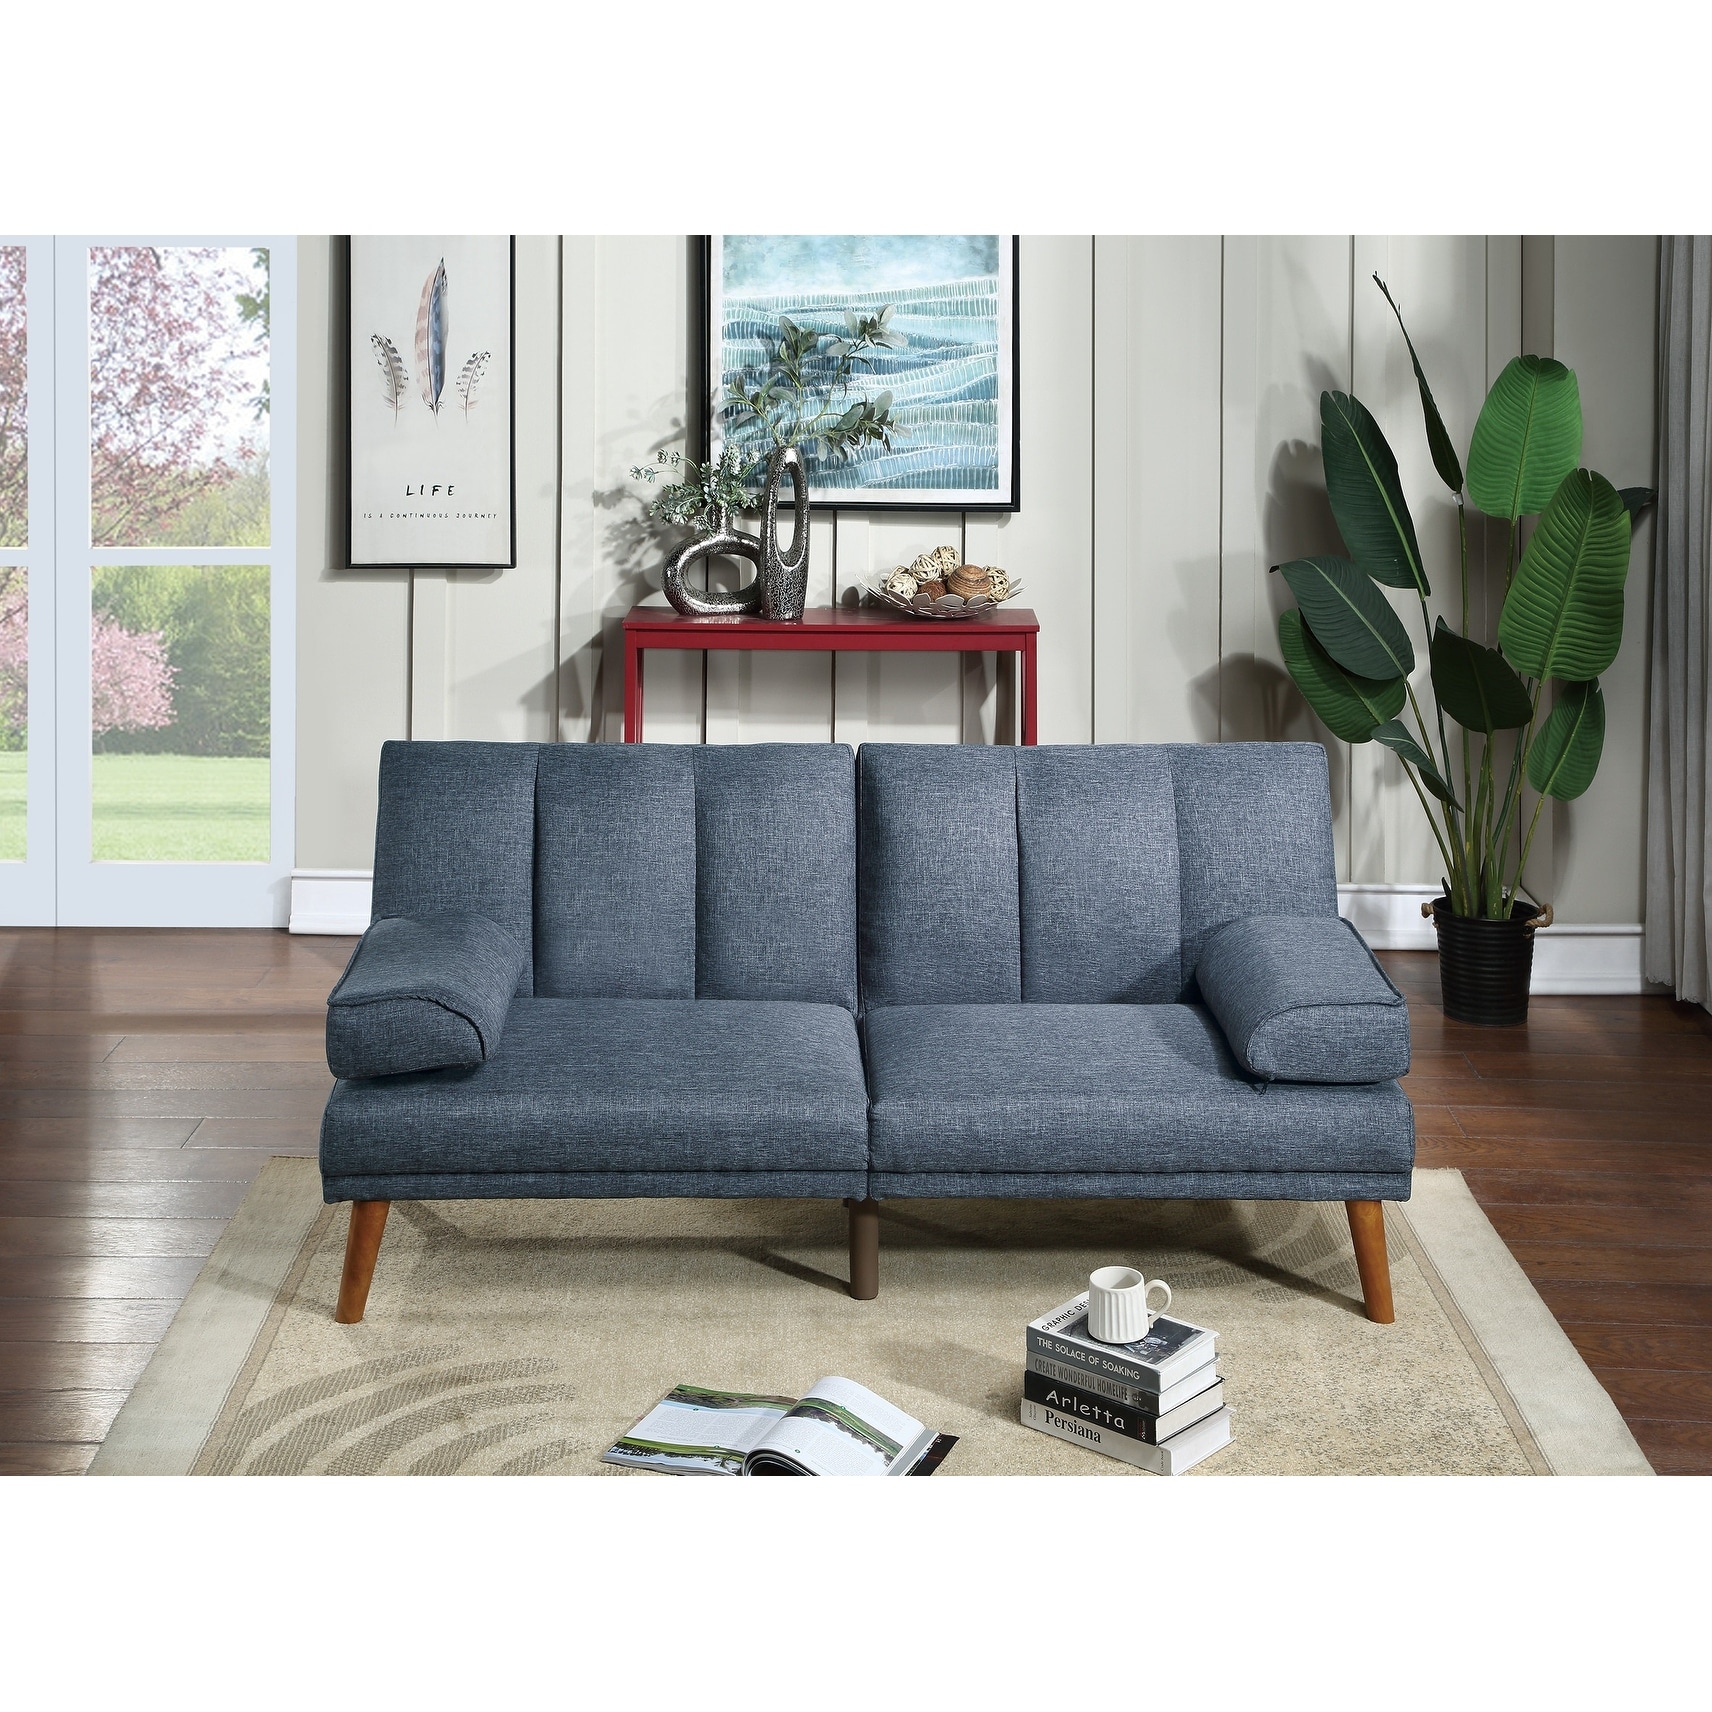 Polyfiber Adjustable Sofa Living Room Furniture Solid Wood Legs Plush Couch